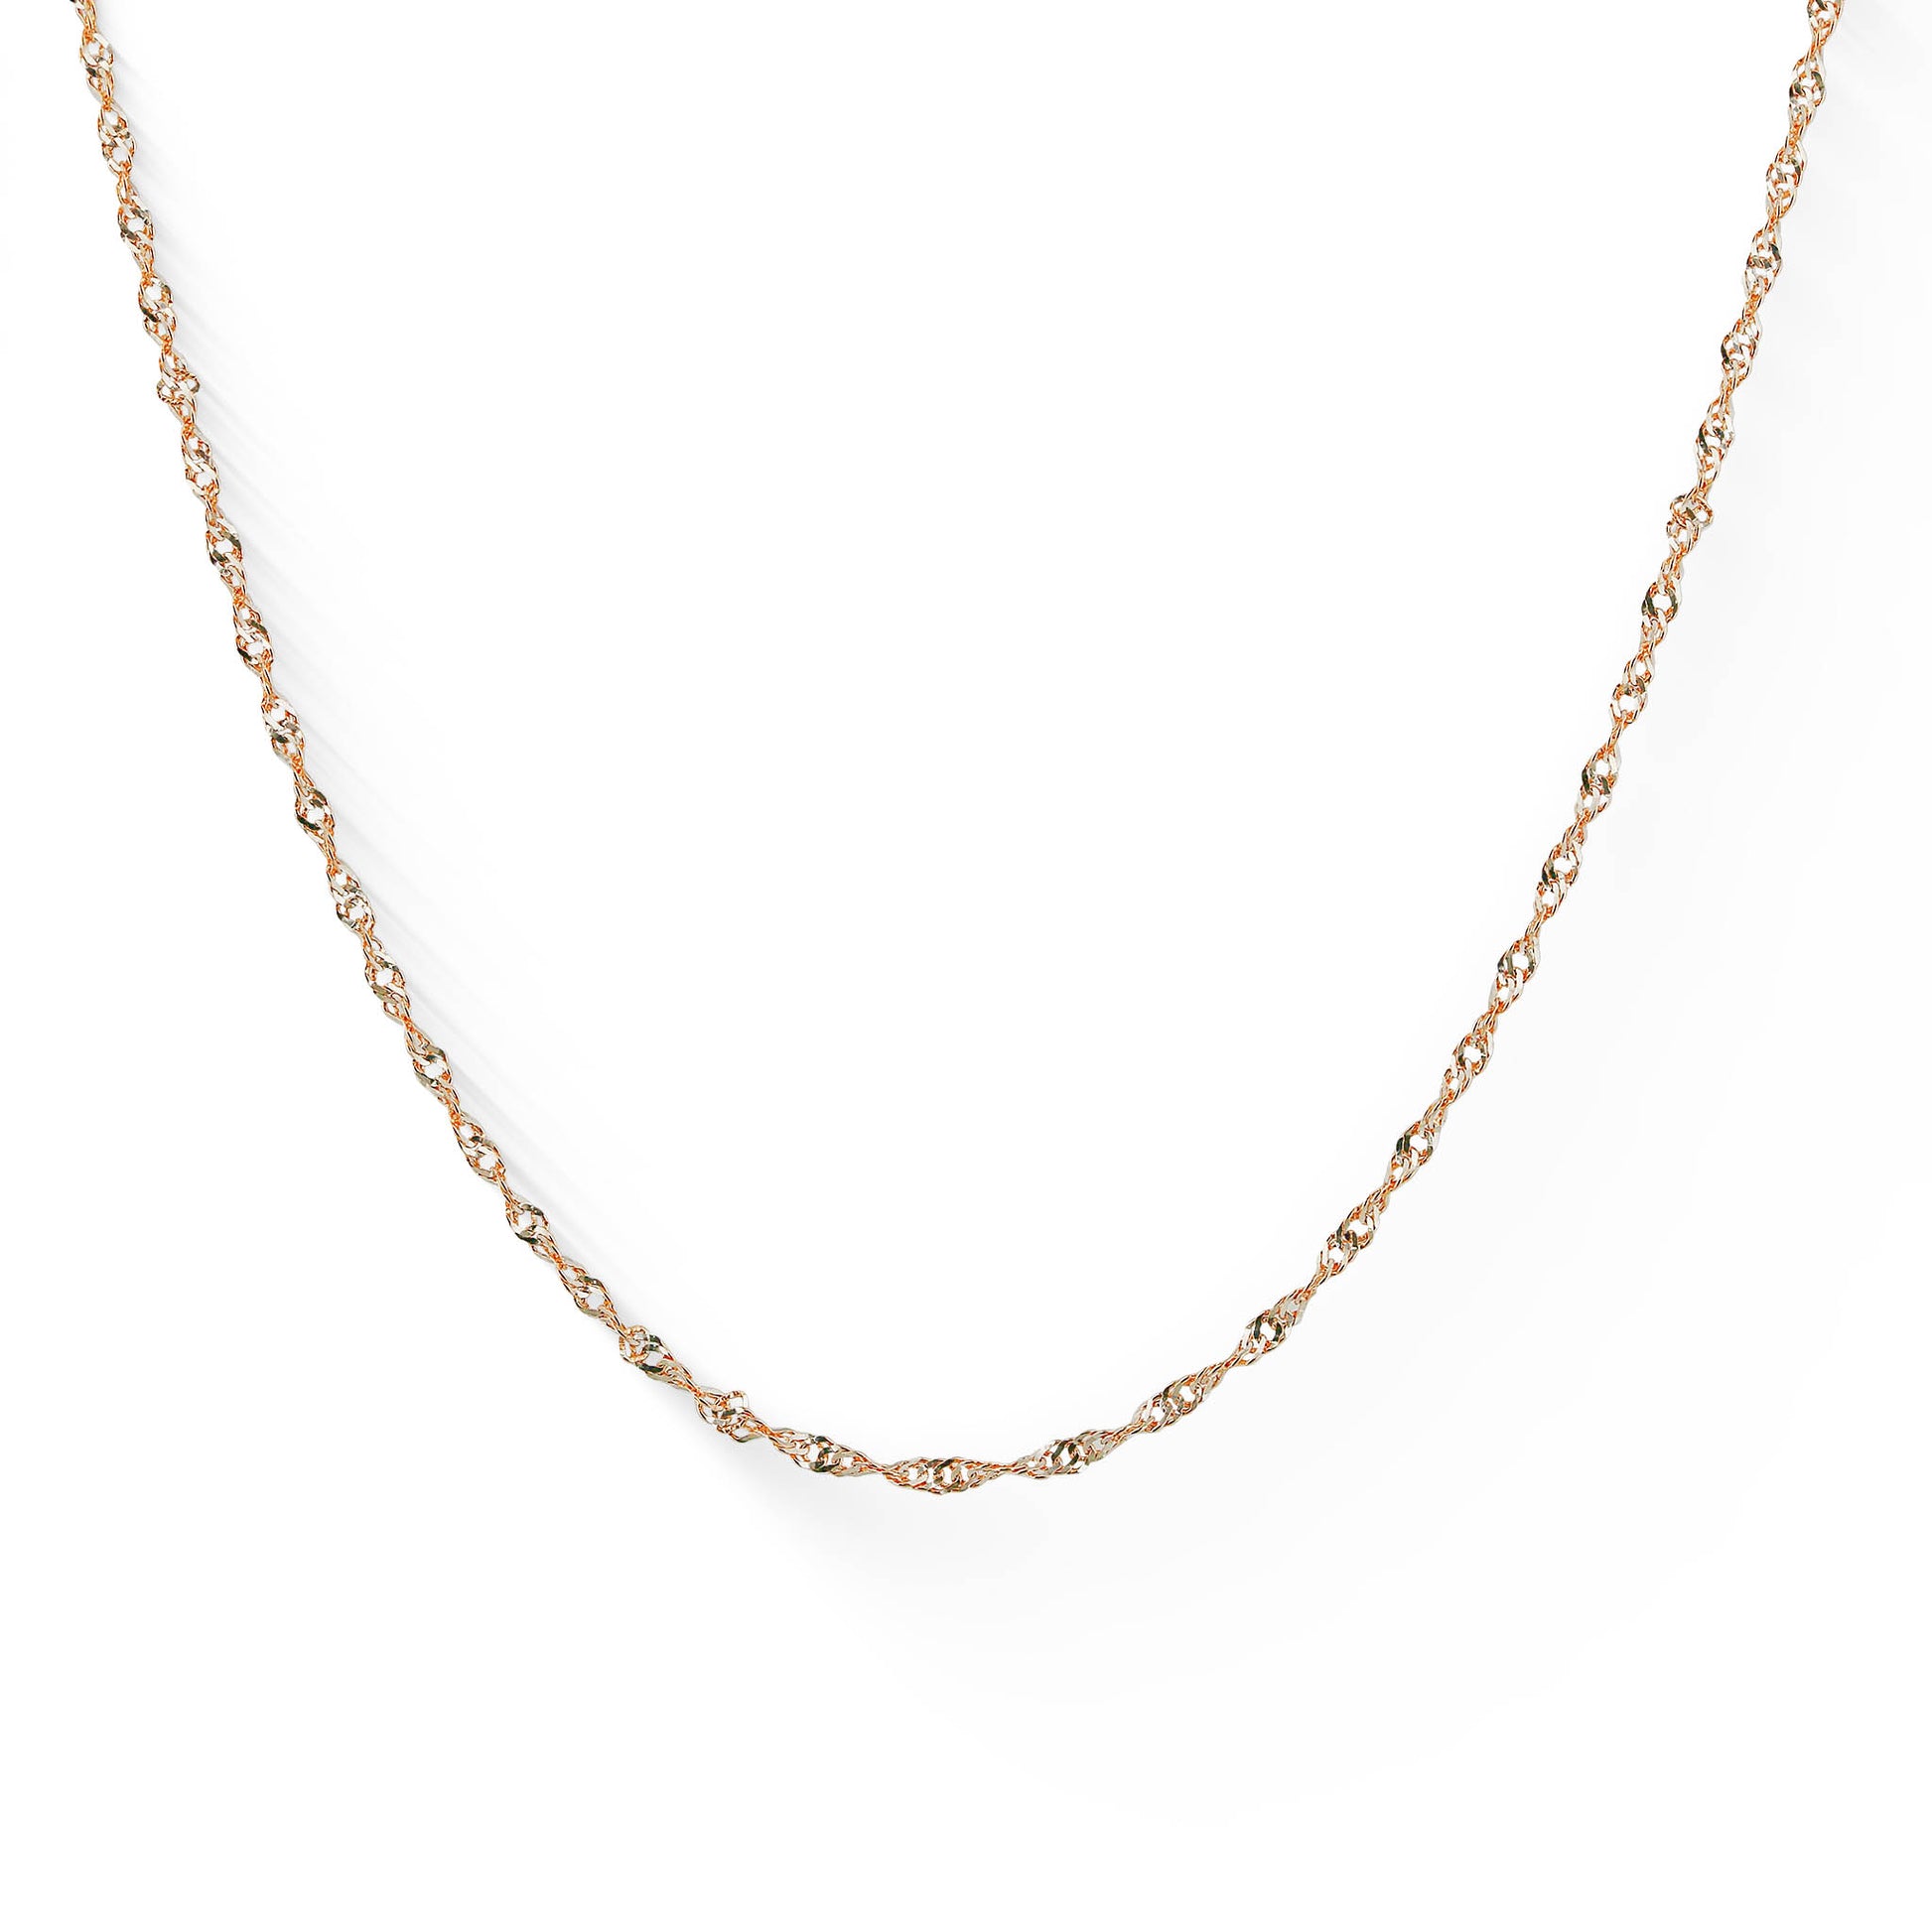 769218 - 14K Rose Gold and 14K White Gold - 22" Adjustable Singapore Chain, 1.5mm